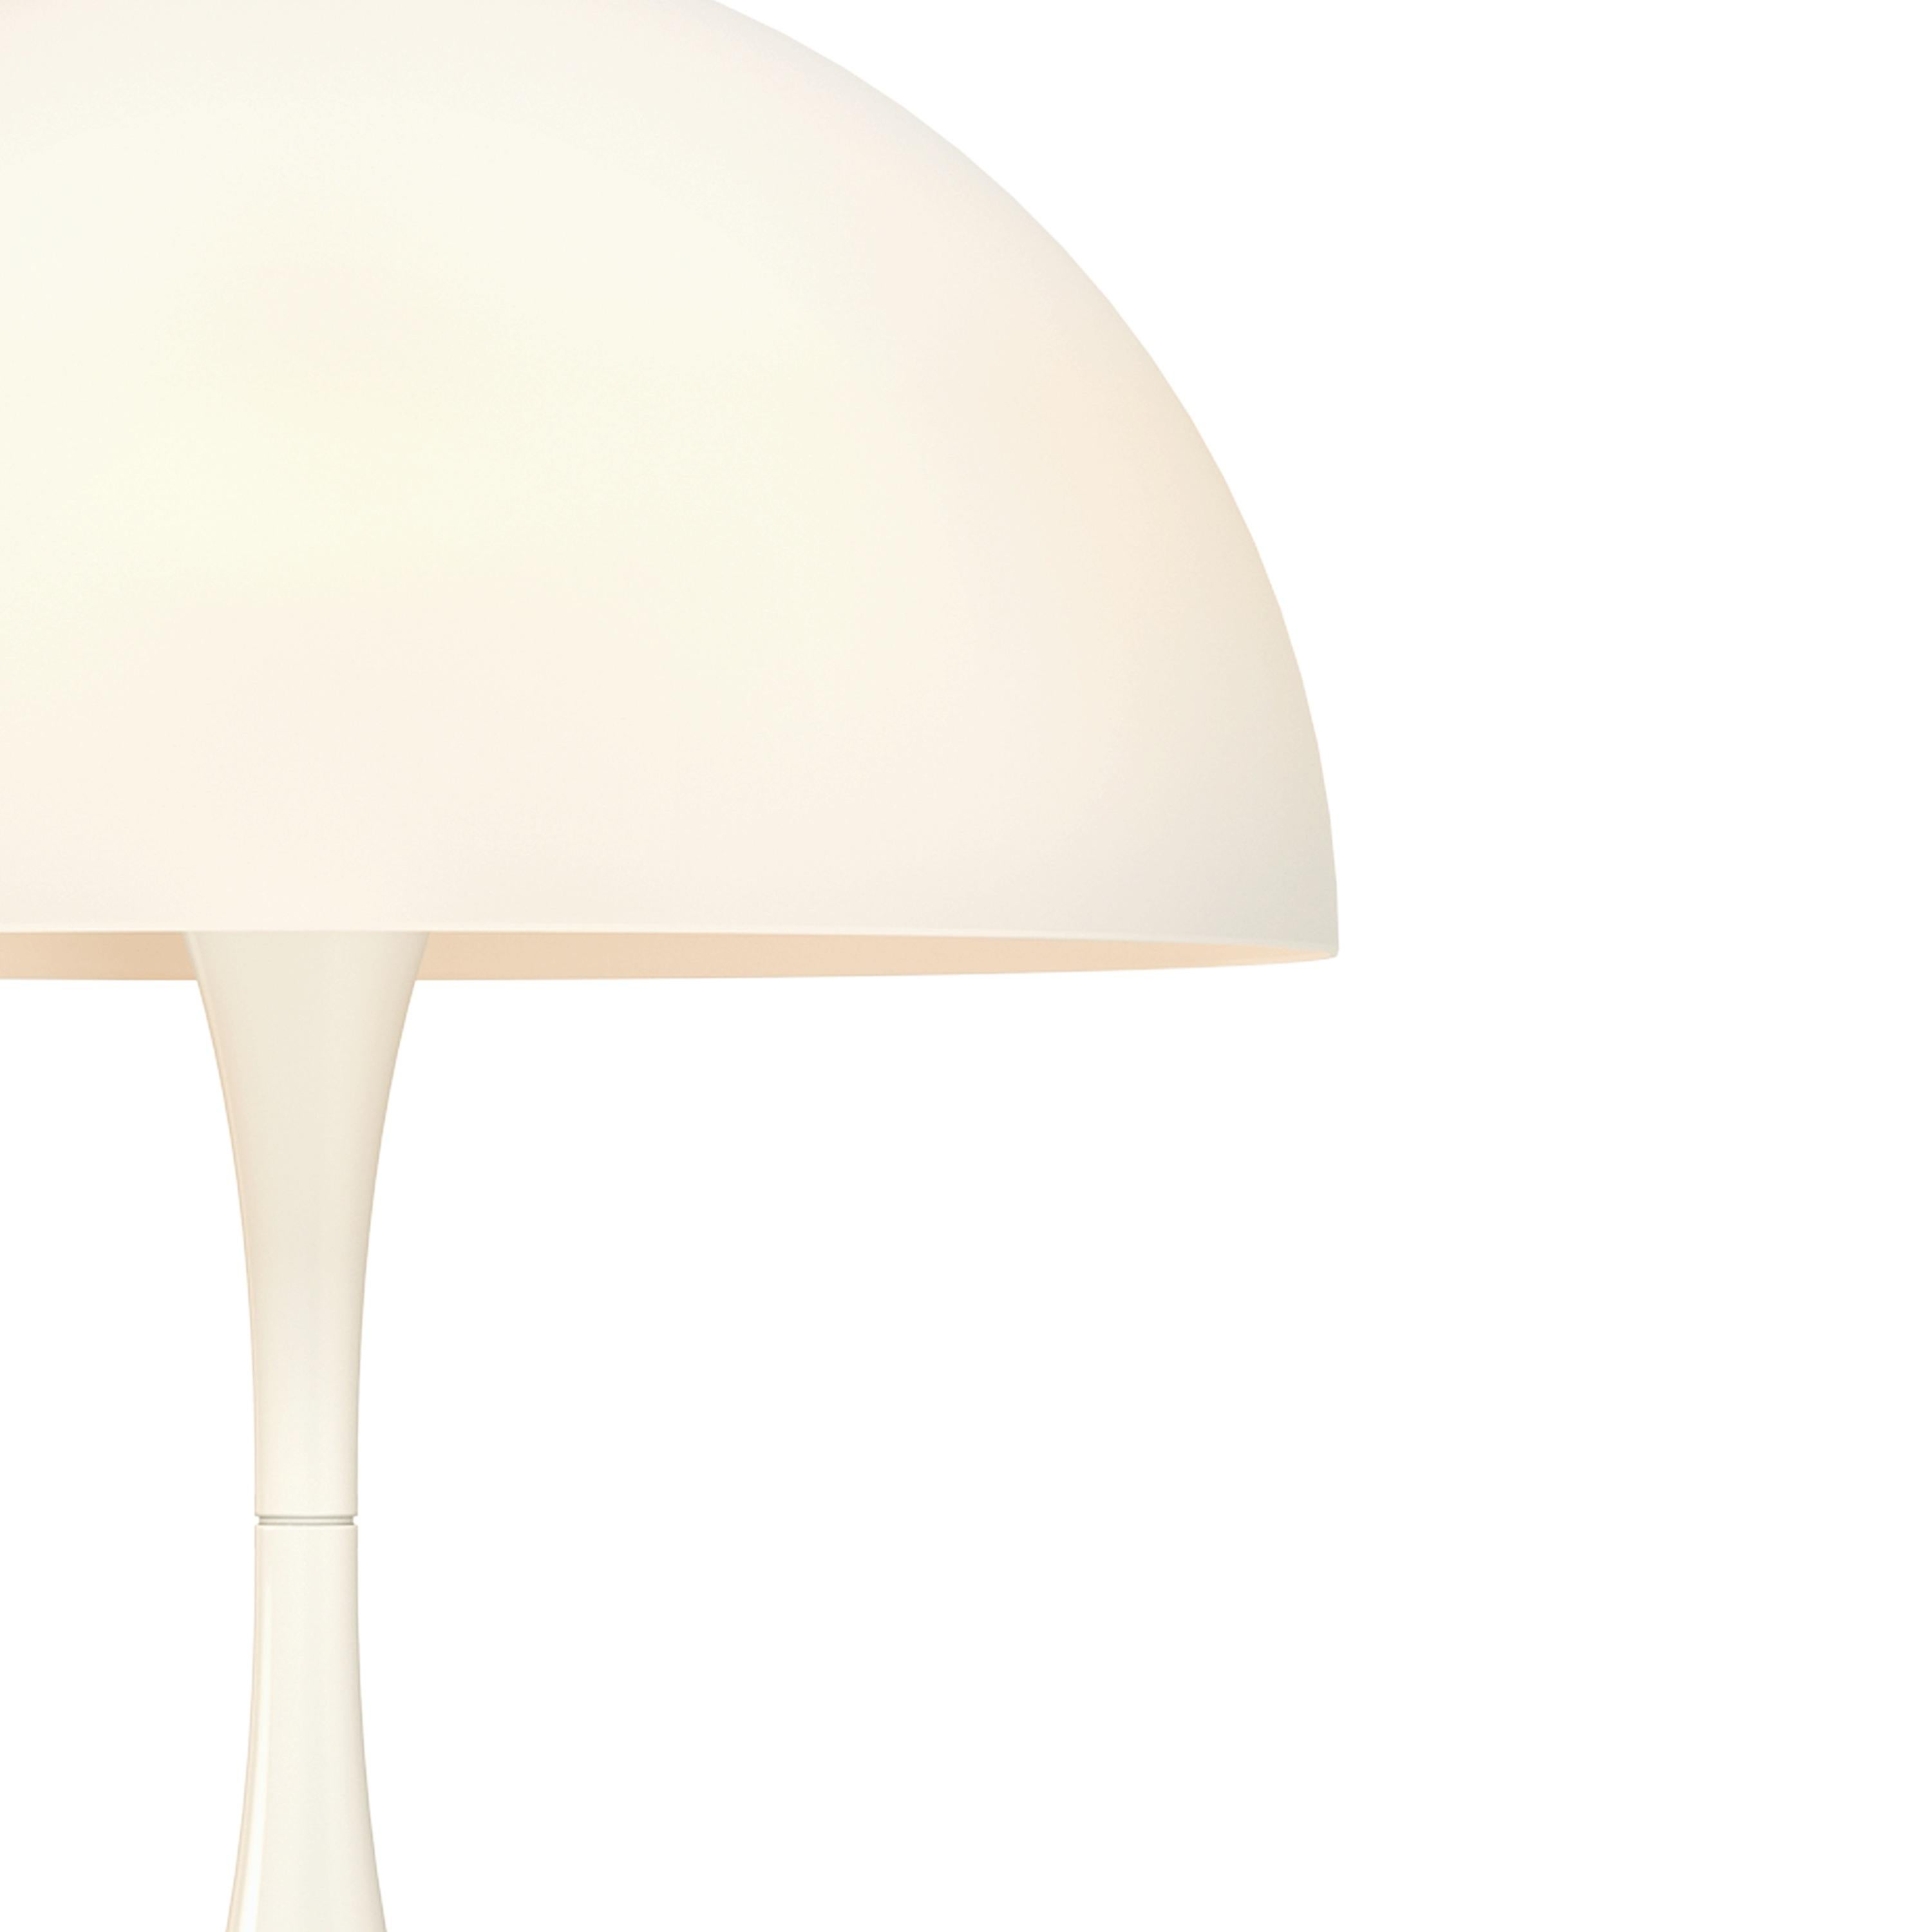 Verner Panton 'Panthella 250' LED table lamp in white opal for Louis Poulsen.

The 'Panthella 250' LED table lamp uses Verner Panton's original drawings to produce an organically shaped lamp with a translucent acrylic shade. The Panthella table